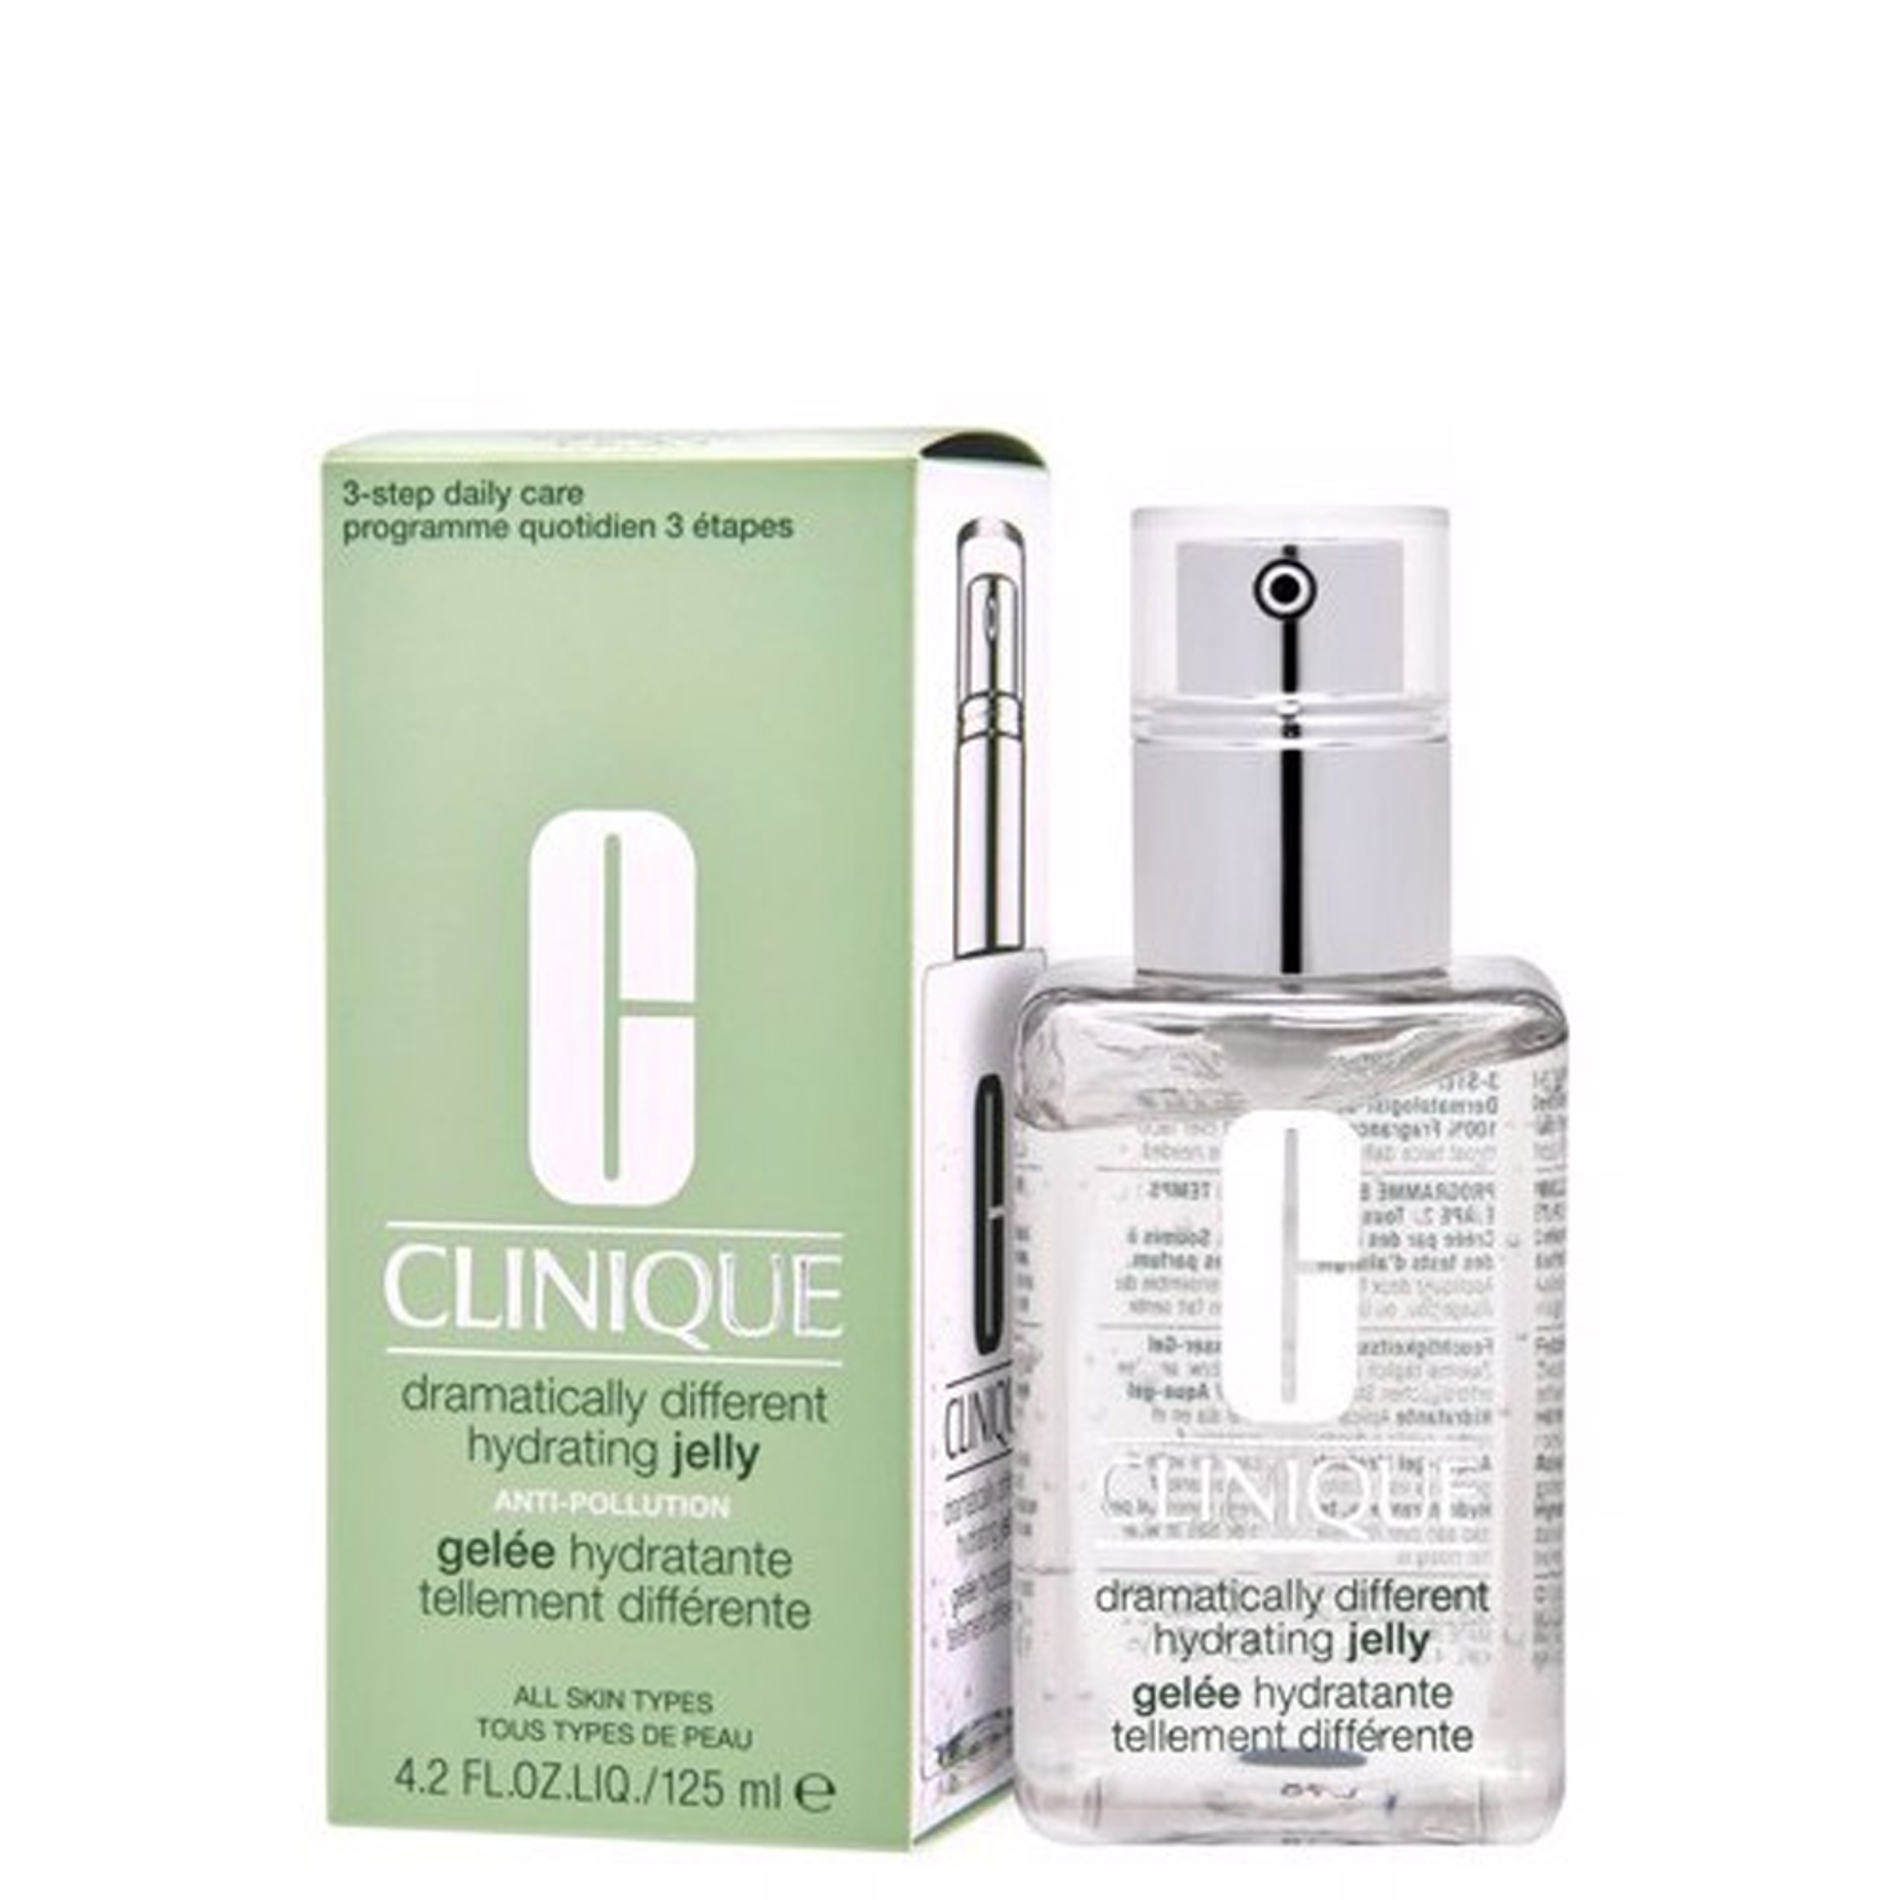 jelly-duong-am-can-bang-da-clinique-dramatically-different-hydrating-jelly-125ml-2